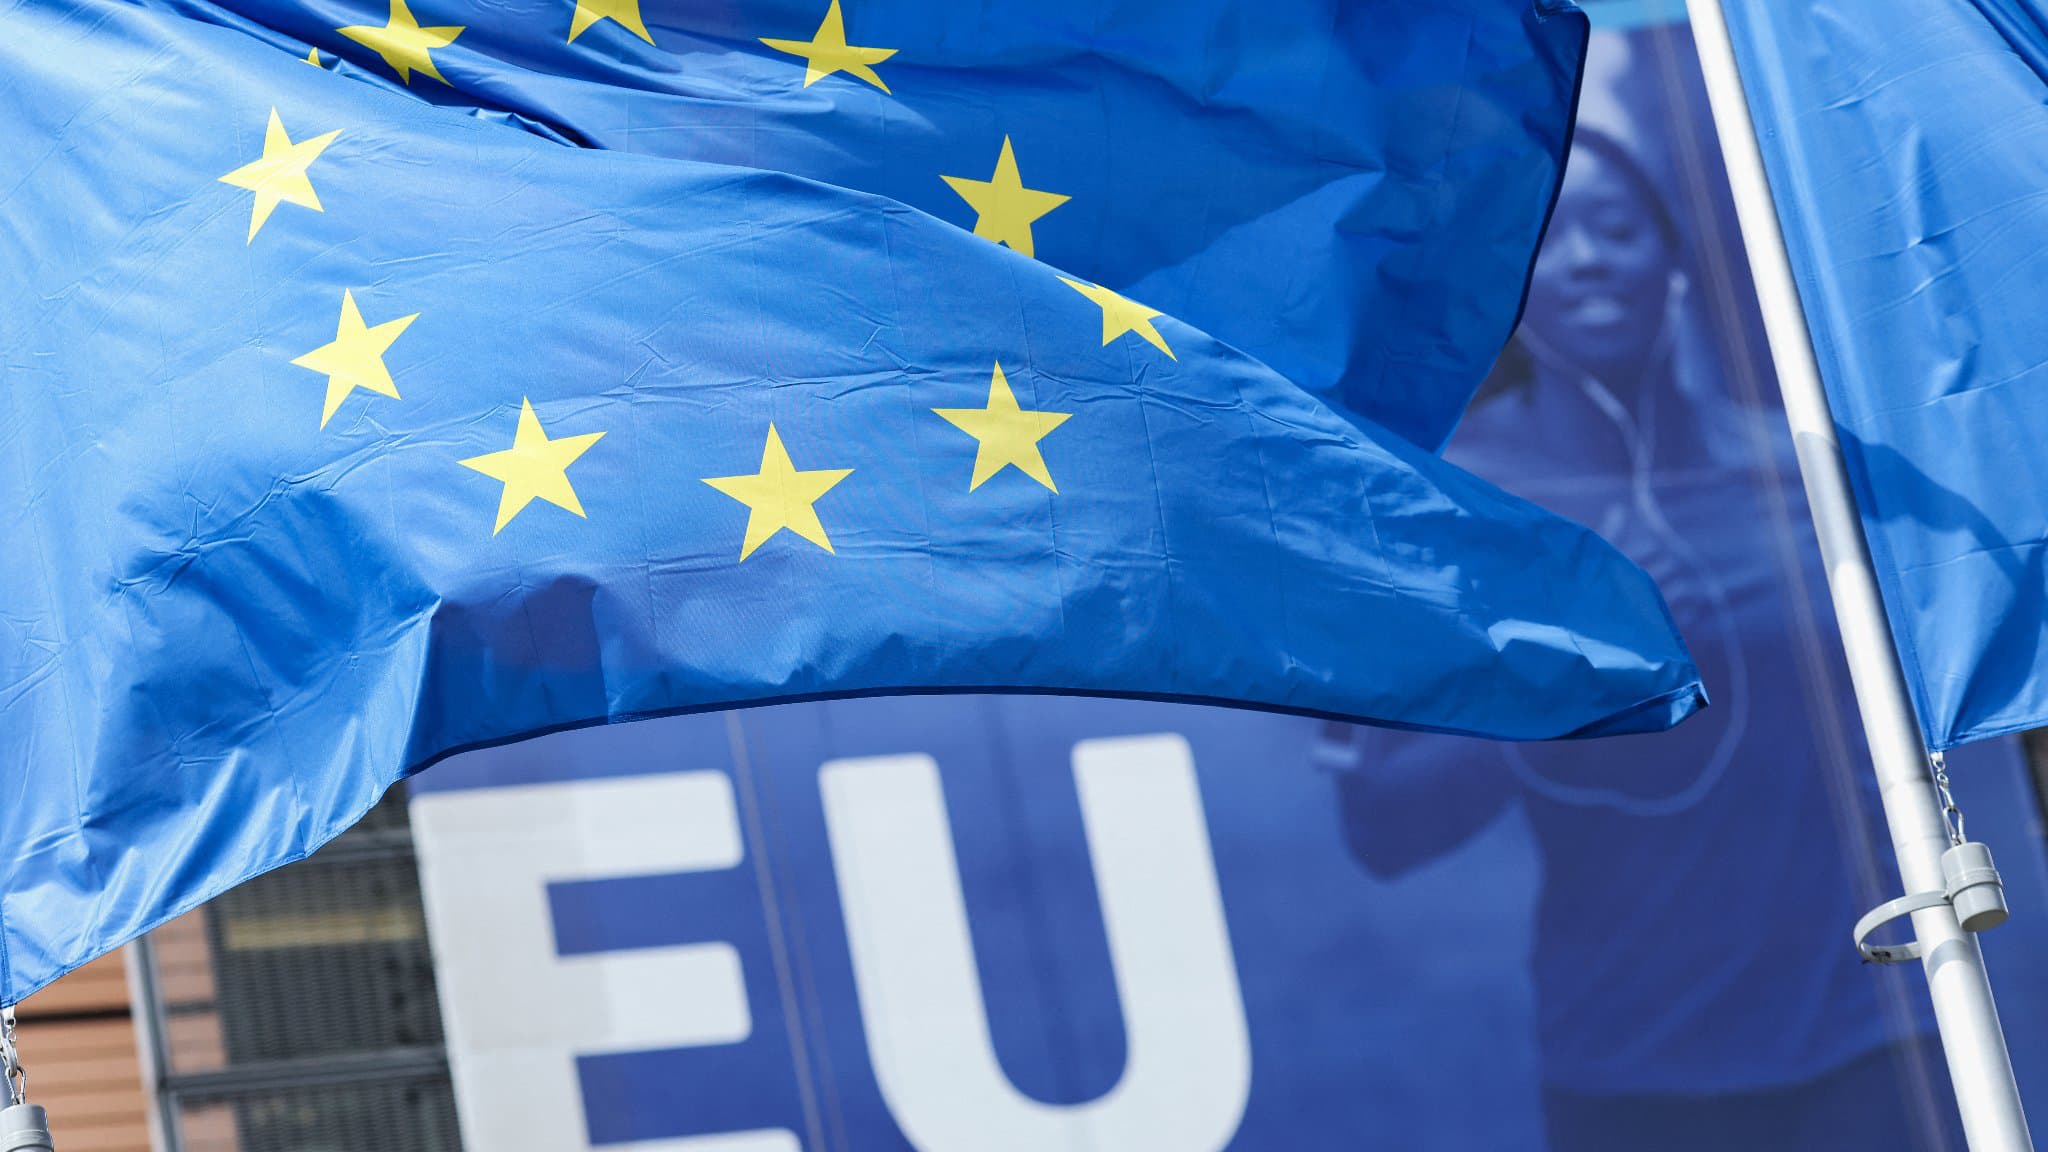 Even if there is an agreement in the OECD, the European Union needs its 